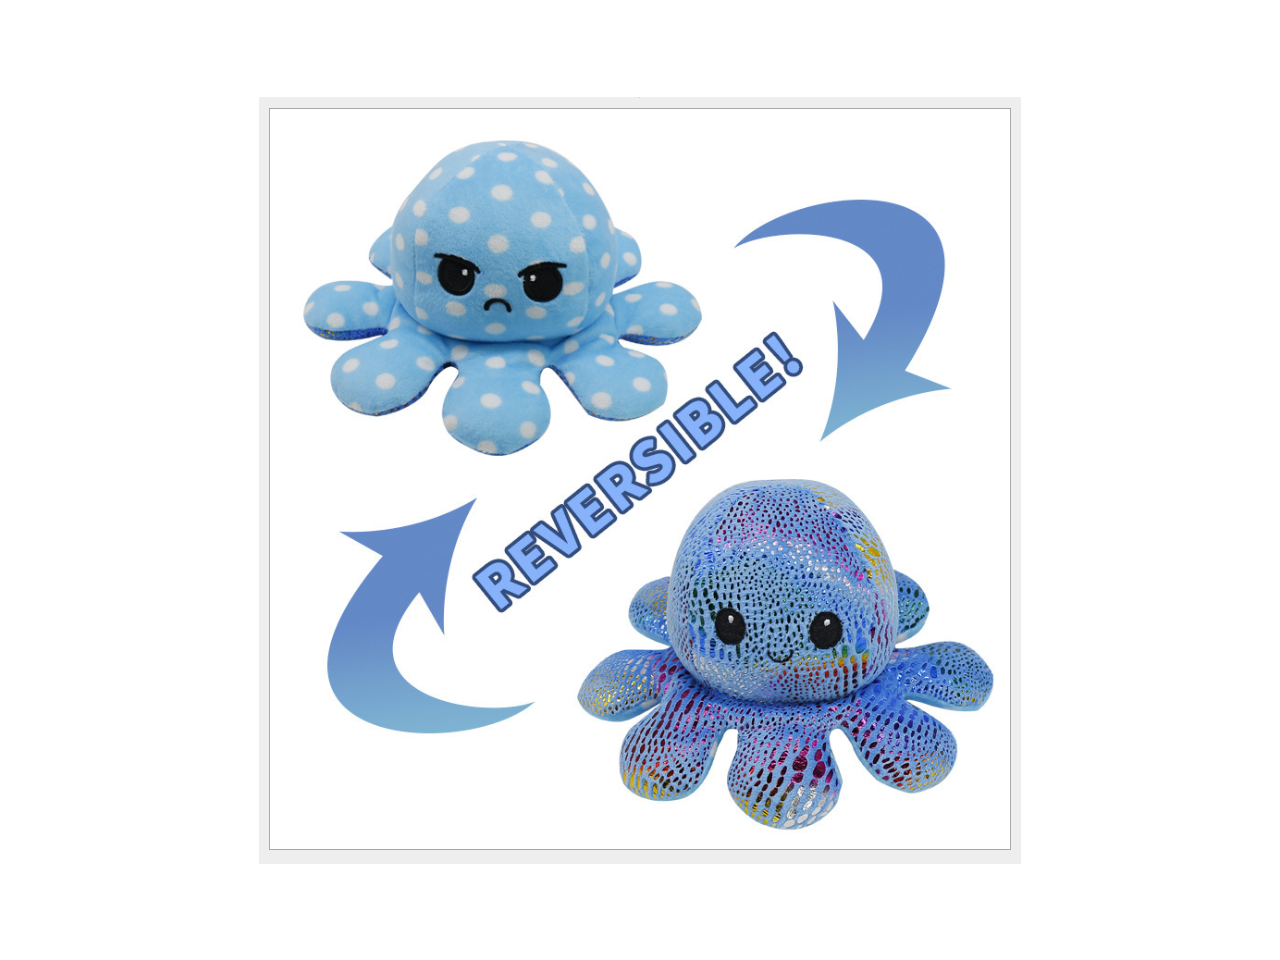 Boys Octopus Plushie Reversable Blue to Pink with Dimple Double Sided Reversible Octopus Plush to Show Emotions-Animal Doll Toys for Girls Soft and Cute Flip Octopus Plush-Stuffed Mood Octopus Teddy 